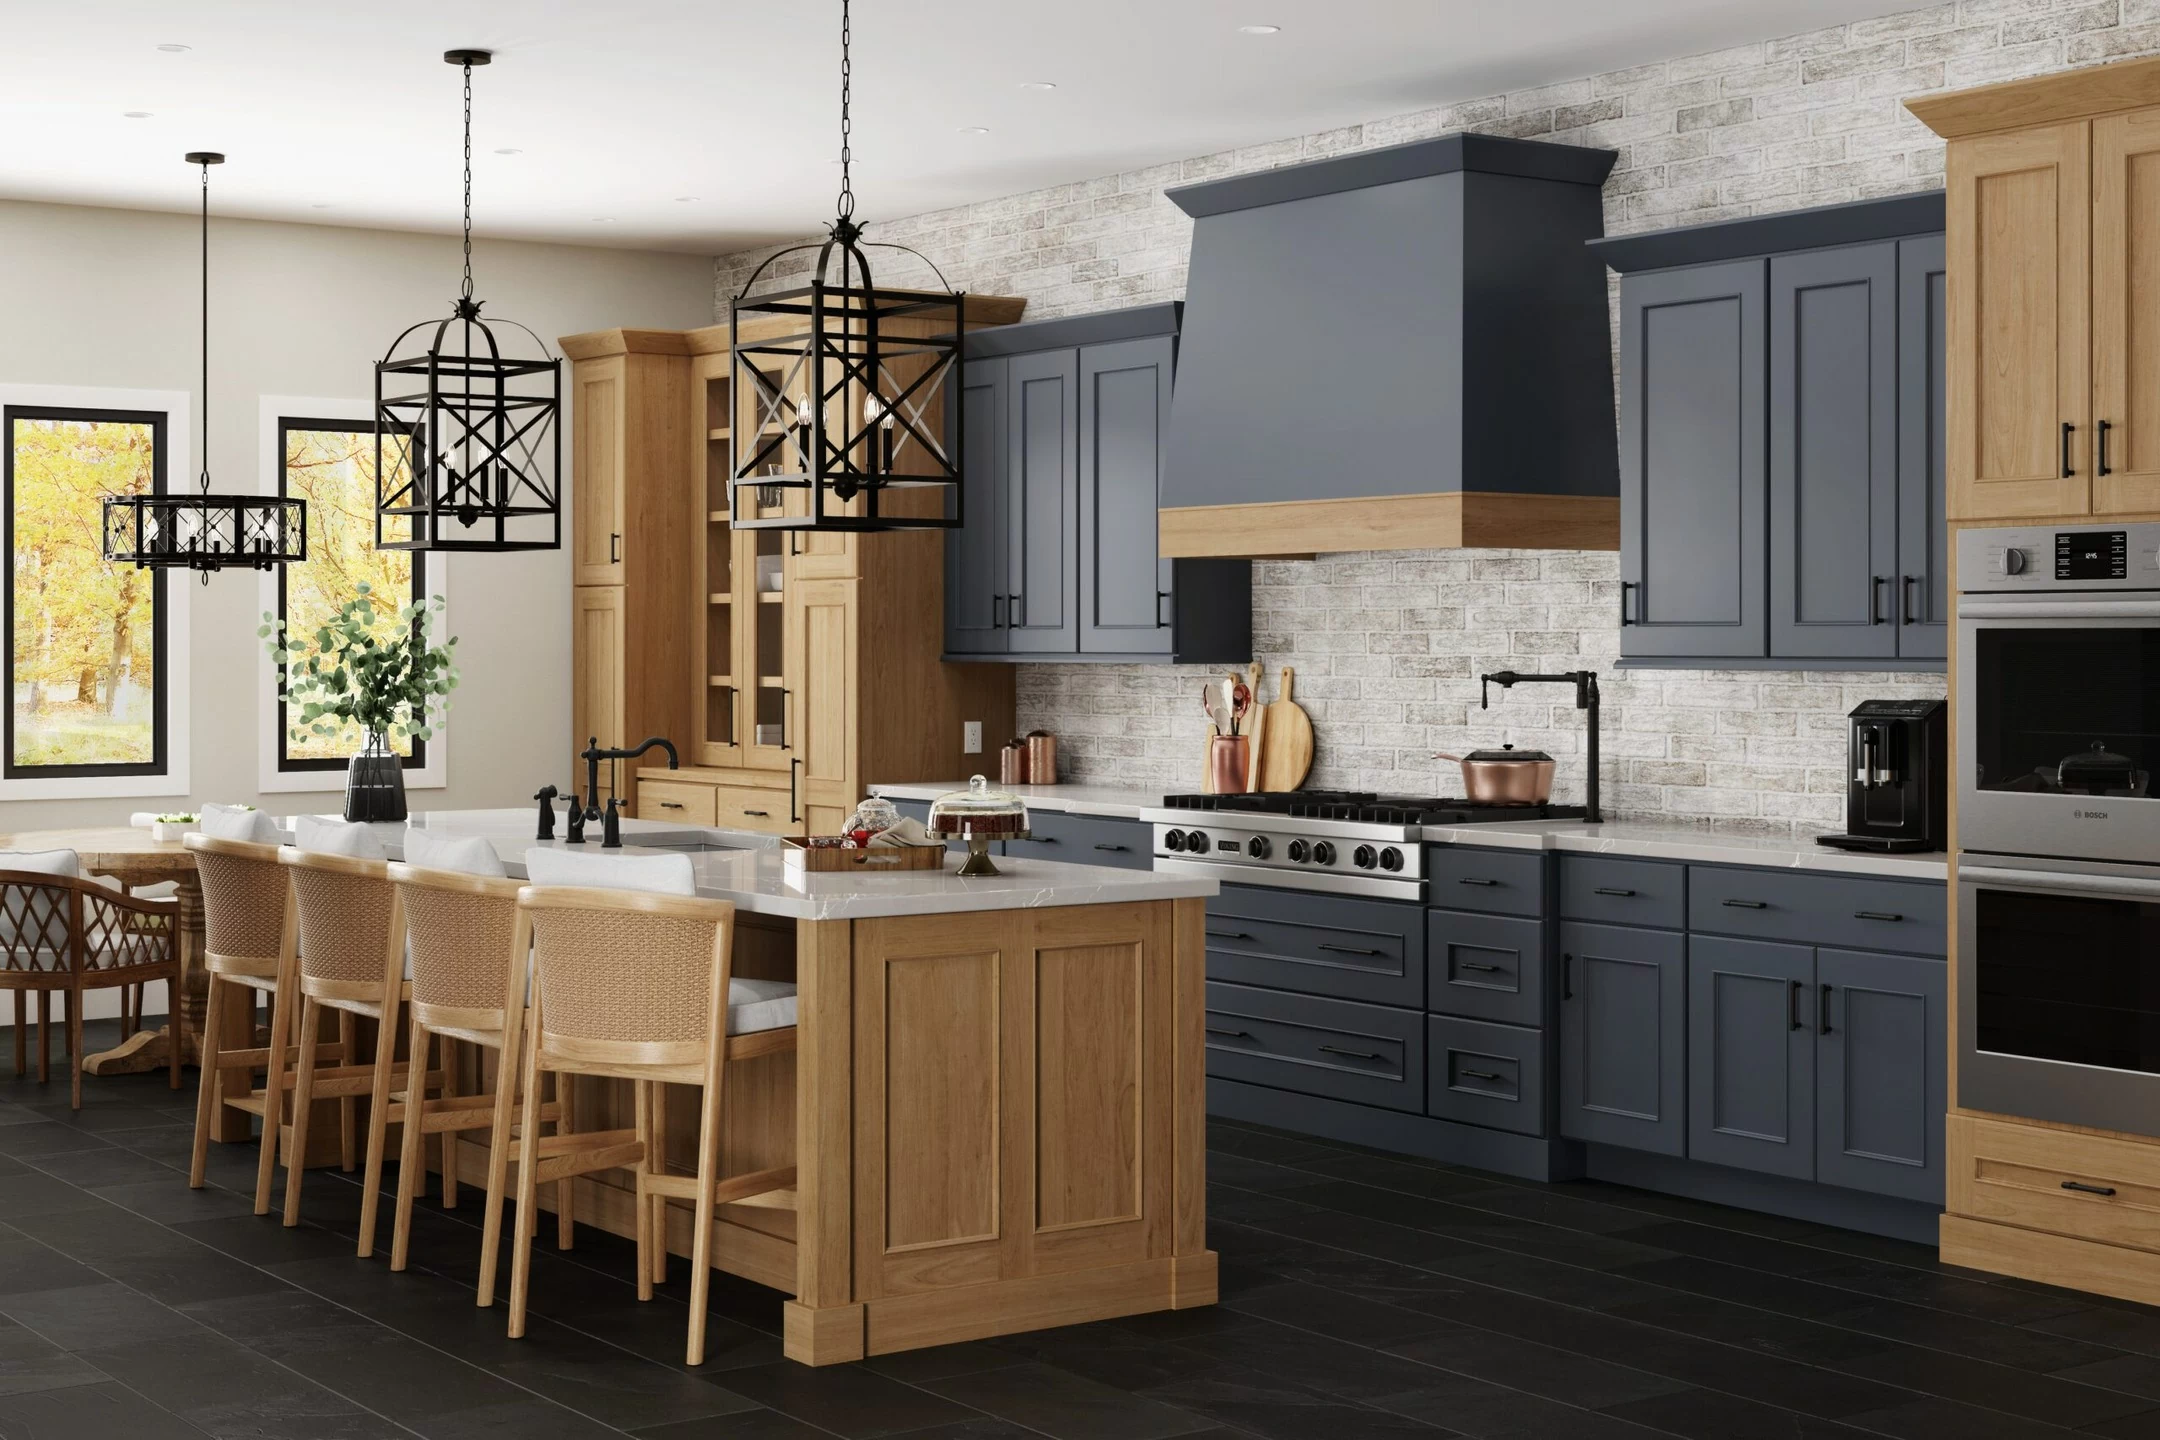 An English style kitchen with a modern look featuring dark blue painted cabinets with light stained cherry wood accents.